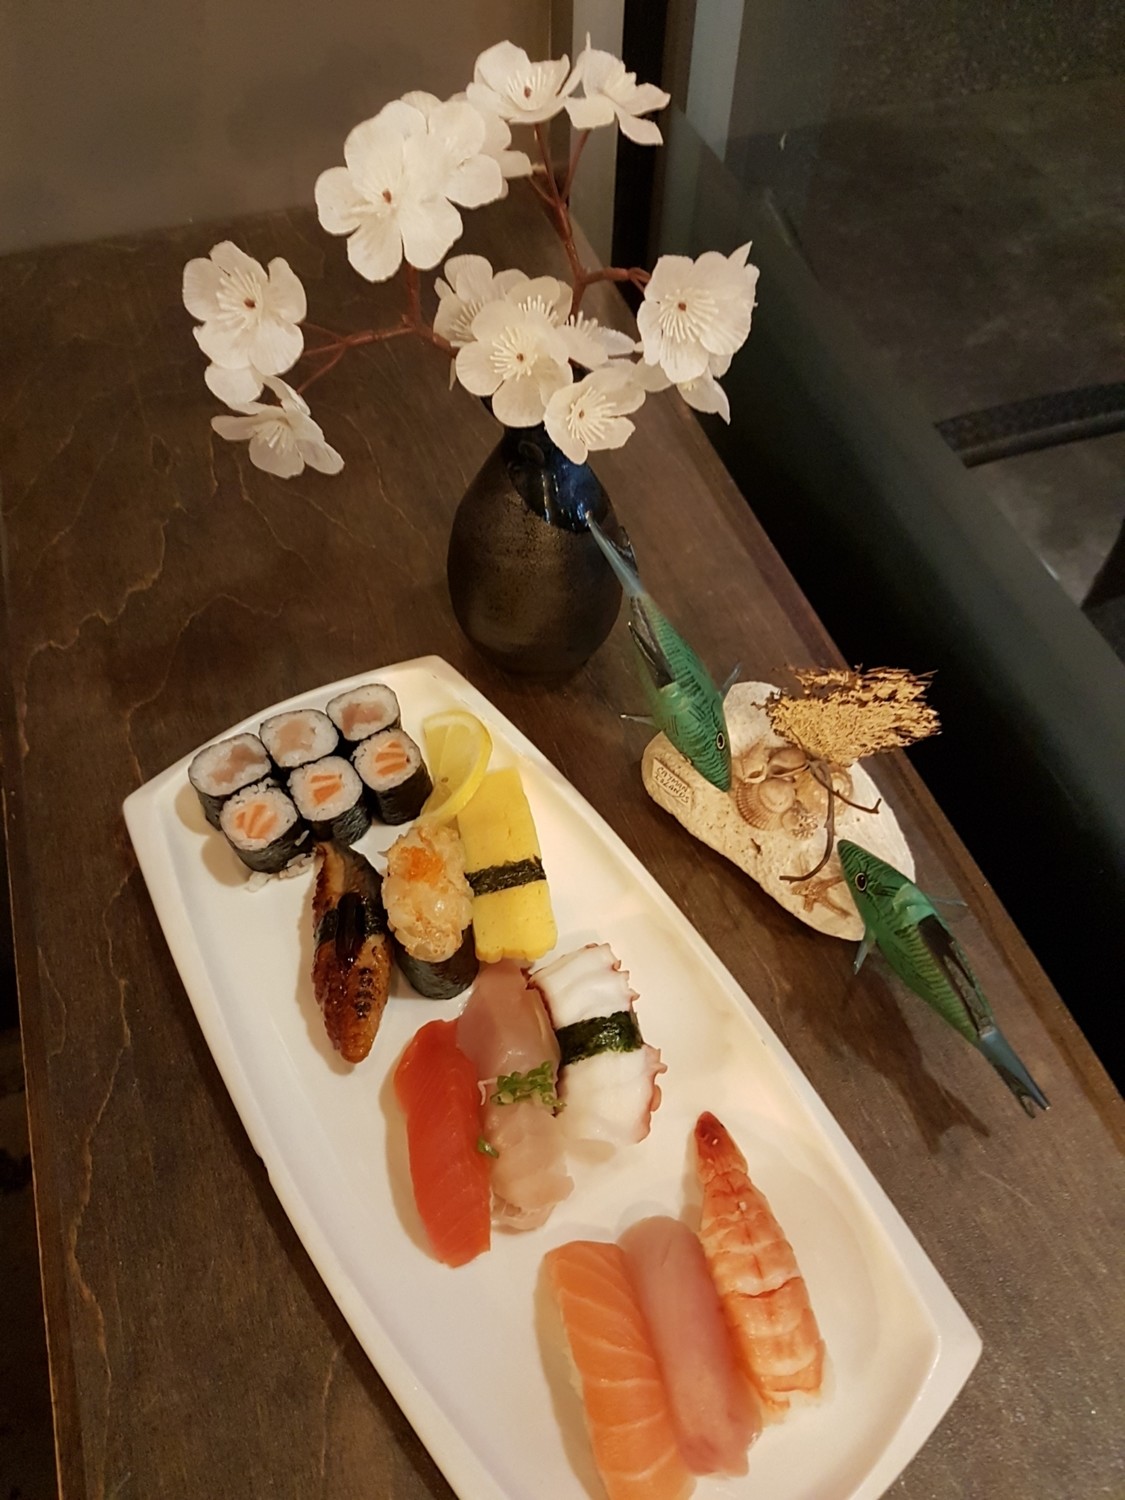 Deluxe Assorted Sushi Combo